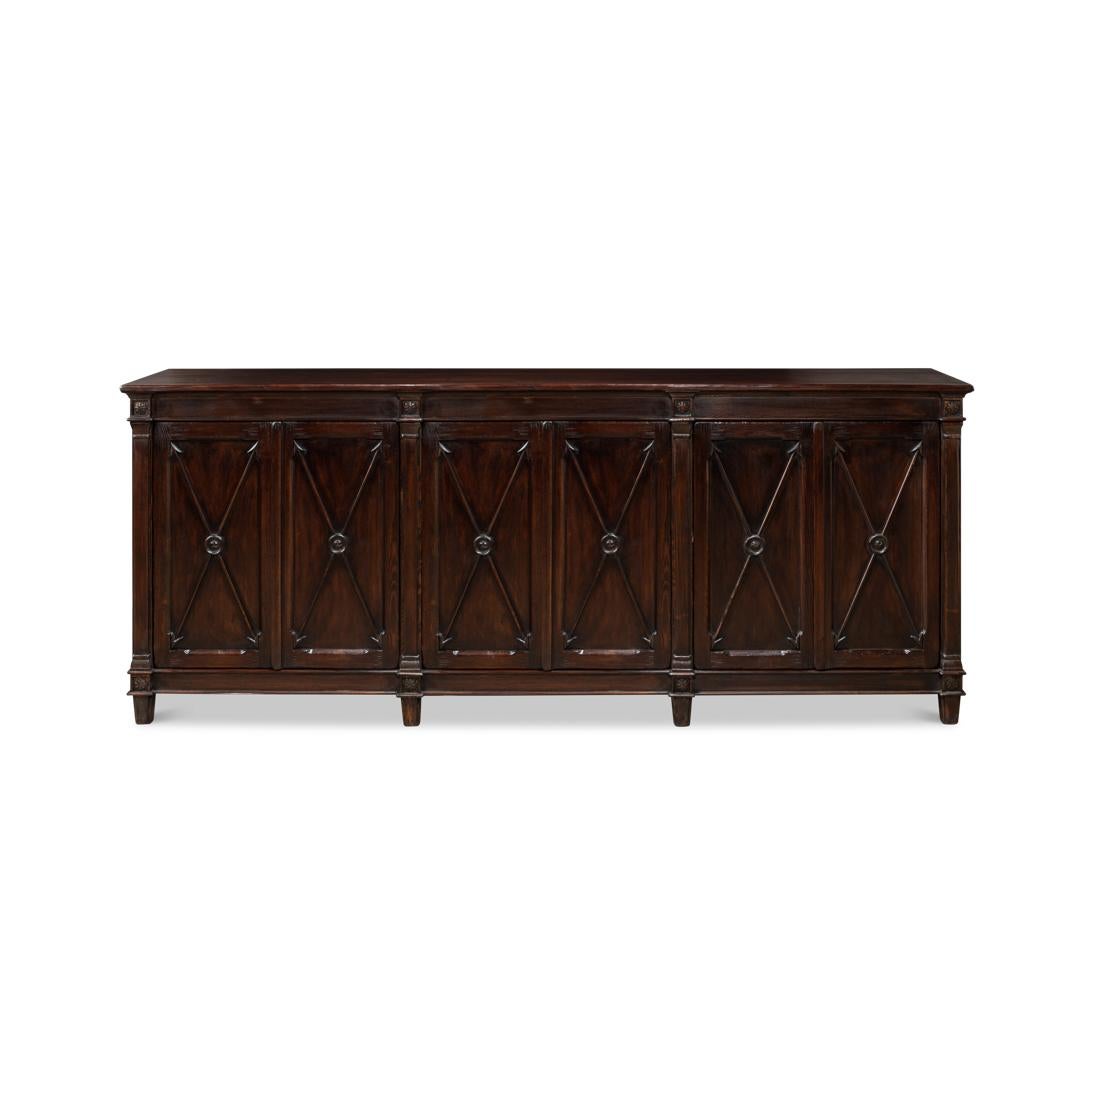 This piece features a hand-rubbed and distressed dark brown stain finish, complementing its six doors adorned with a classic cross-arrow design. Crafted from high-quality pine, this buffet offers a rustic, antiqued finish that exudes old-world charm